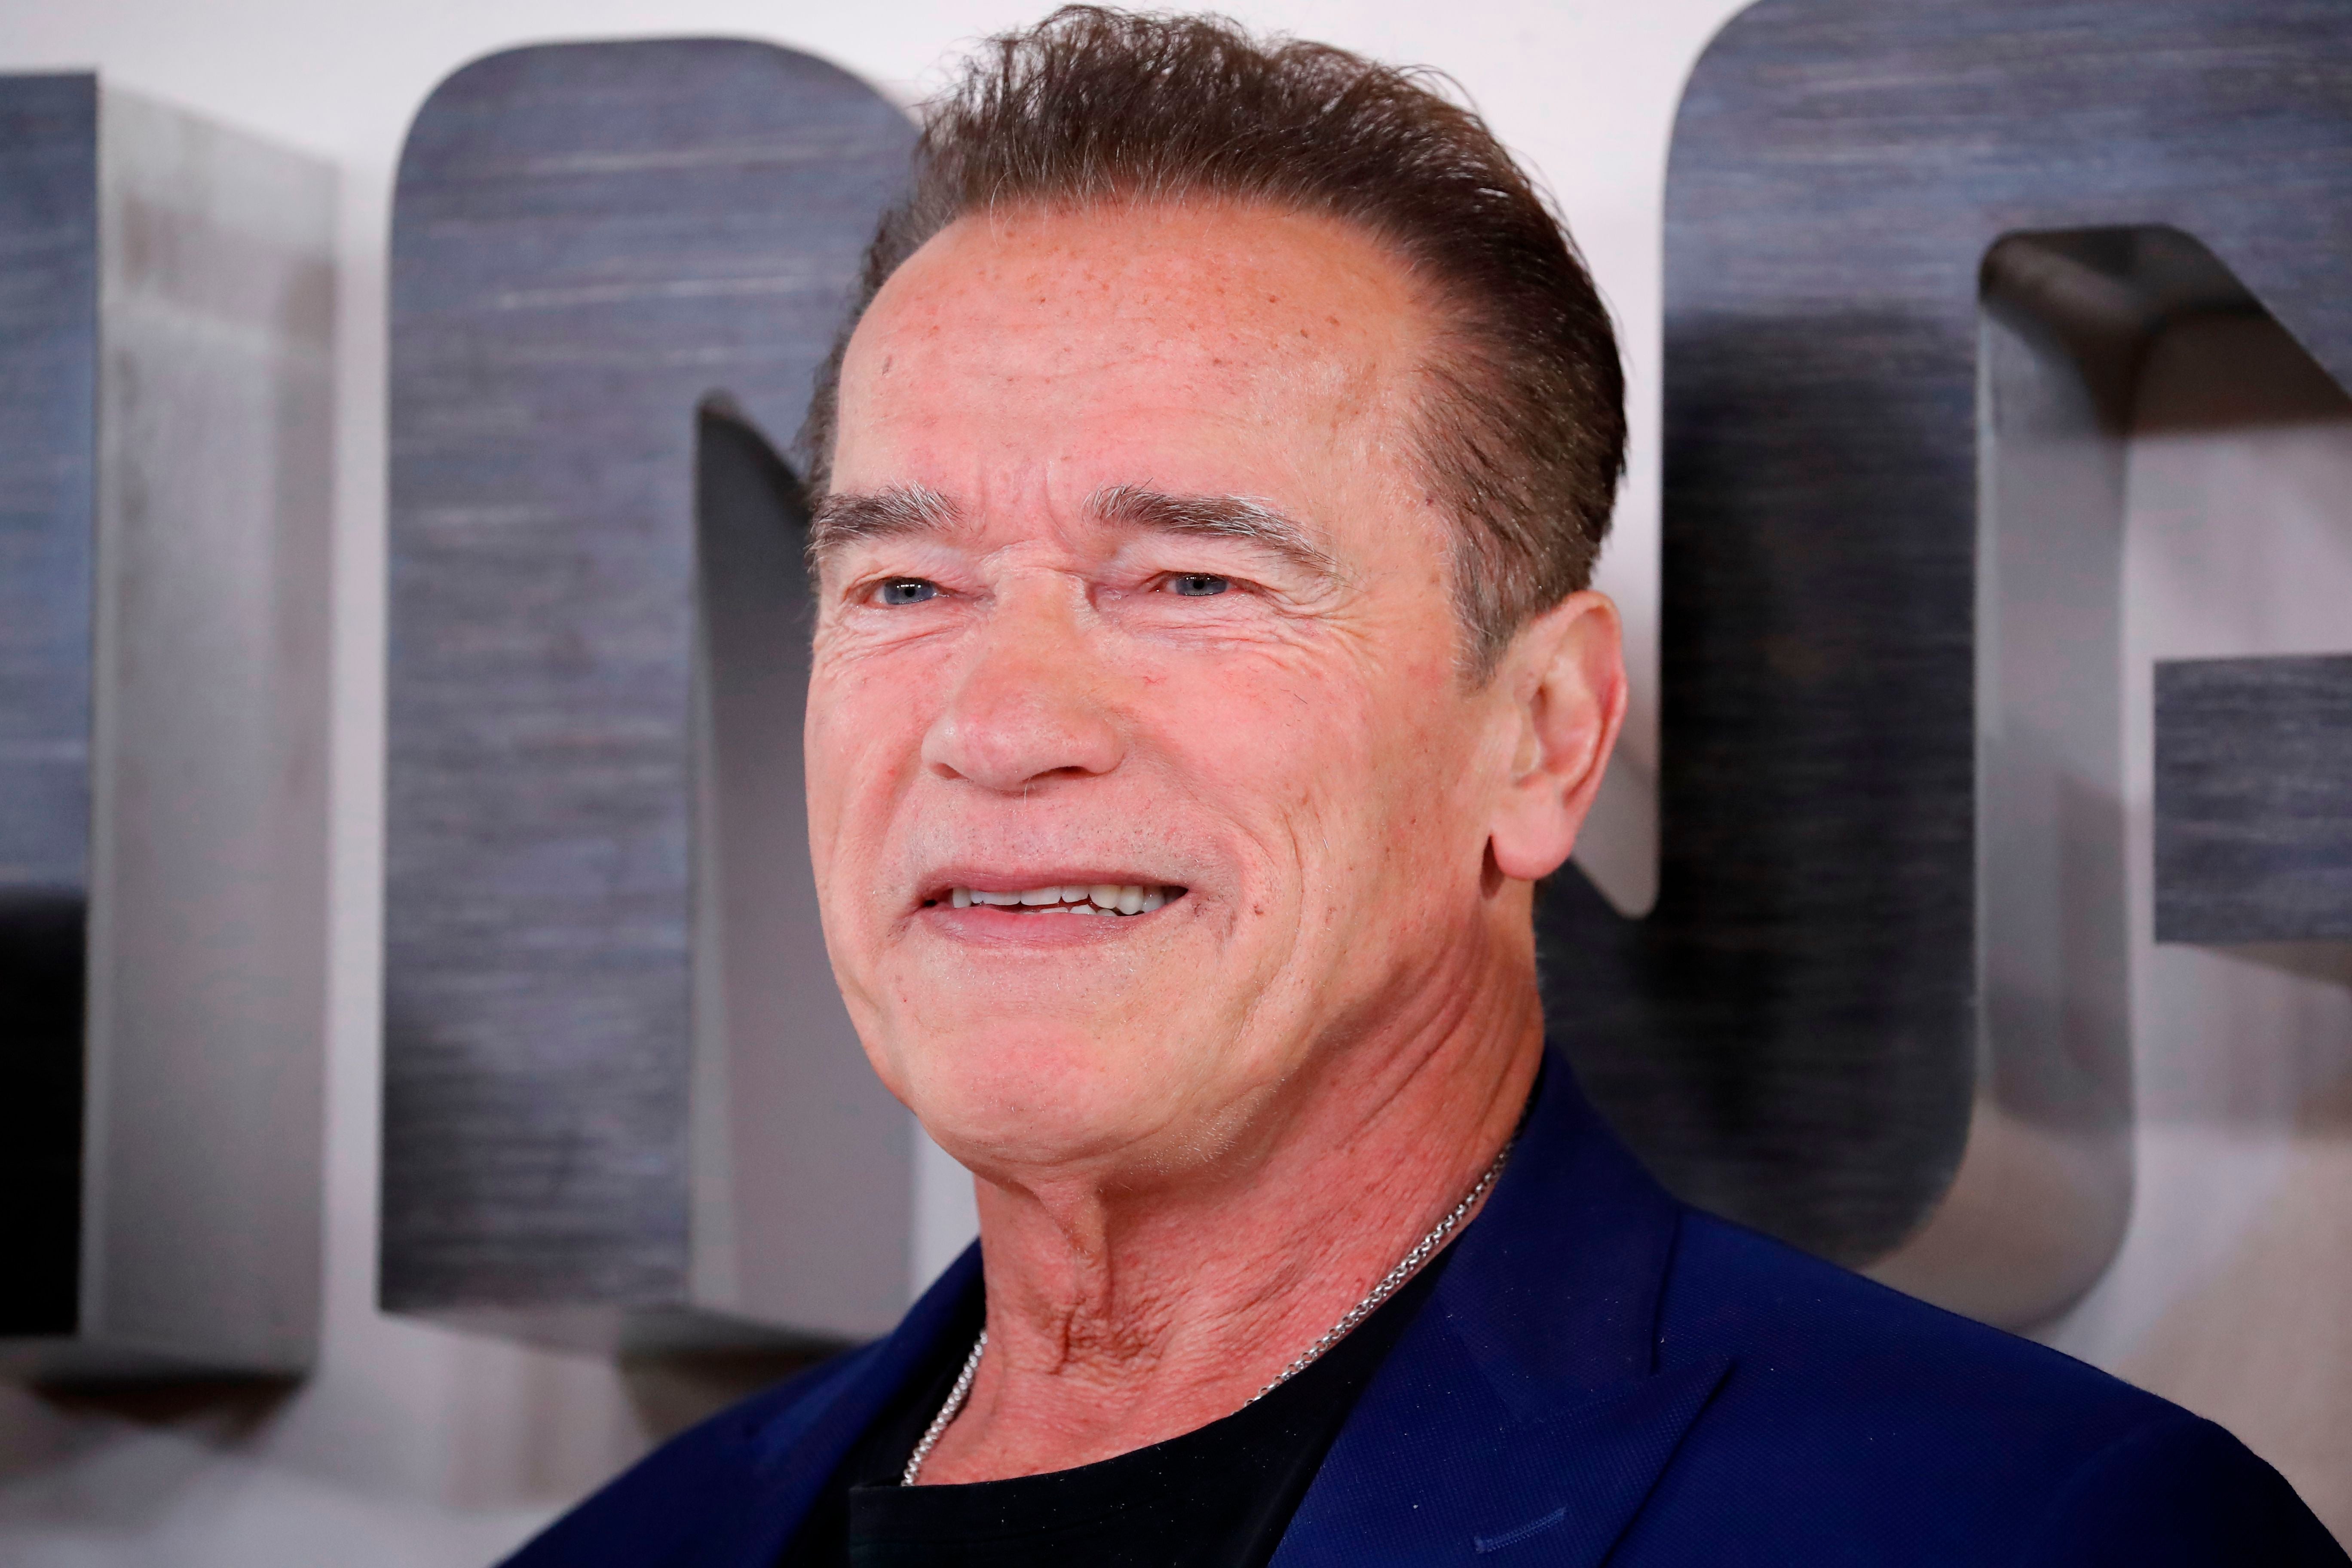 Arnold Schwarzenegger poses during a photo call to promote the film Terminator: Dark Fate in London on October 17, 2019. The former governor and actor has penned a touching letter to the mother of Ella Kissi-Debrah.